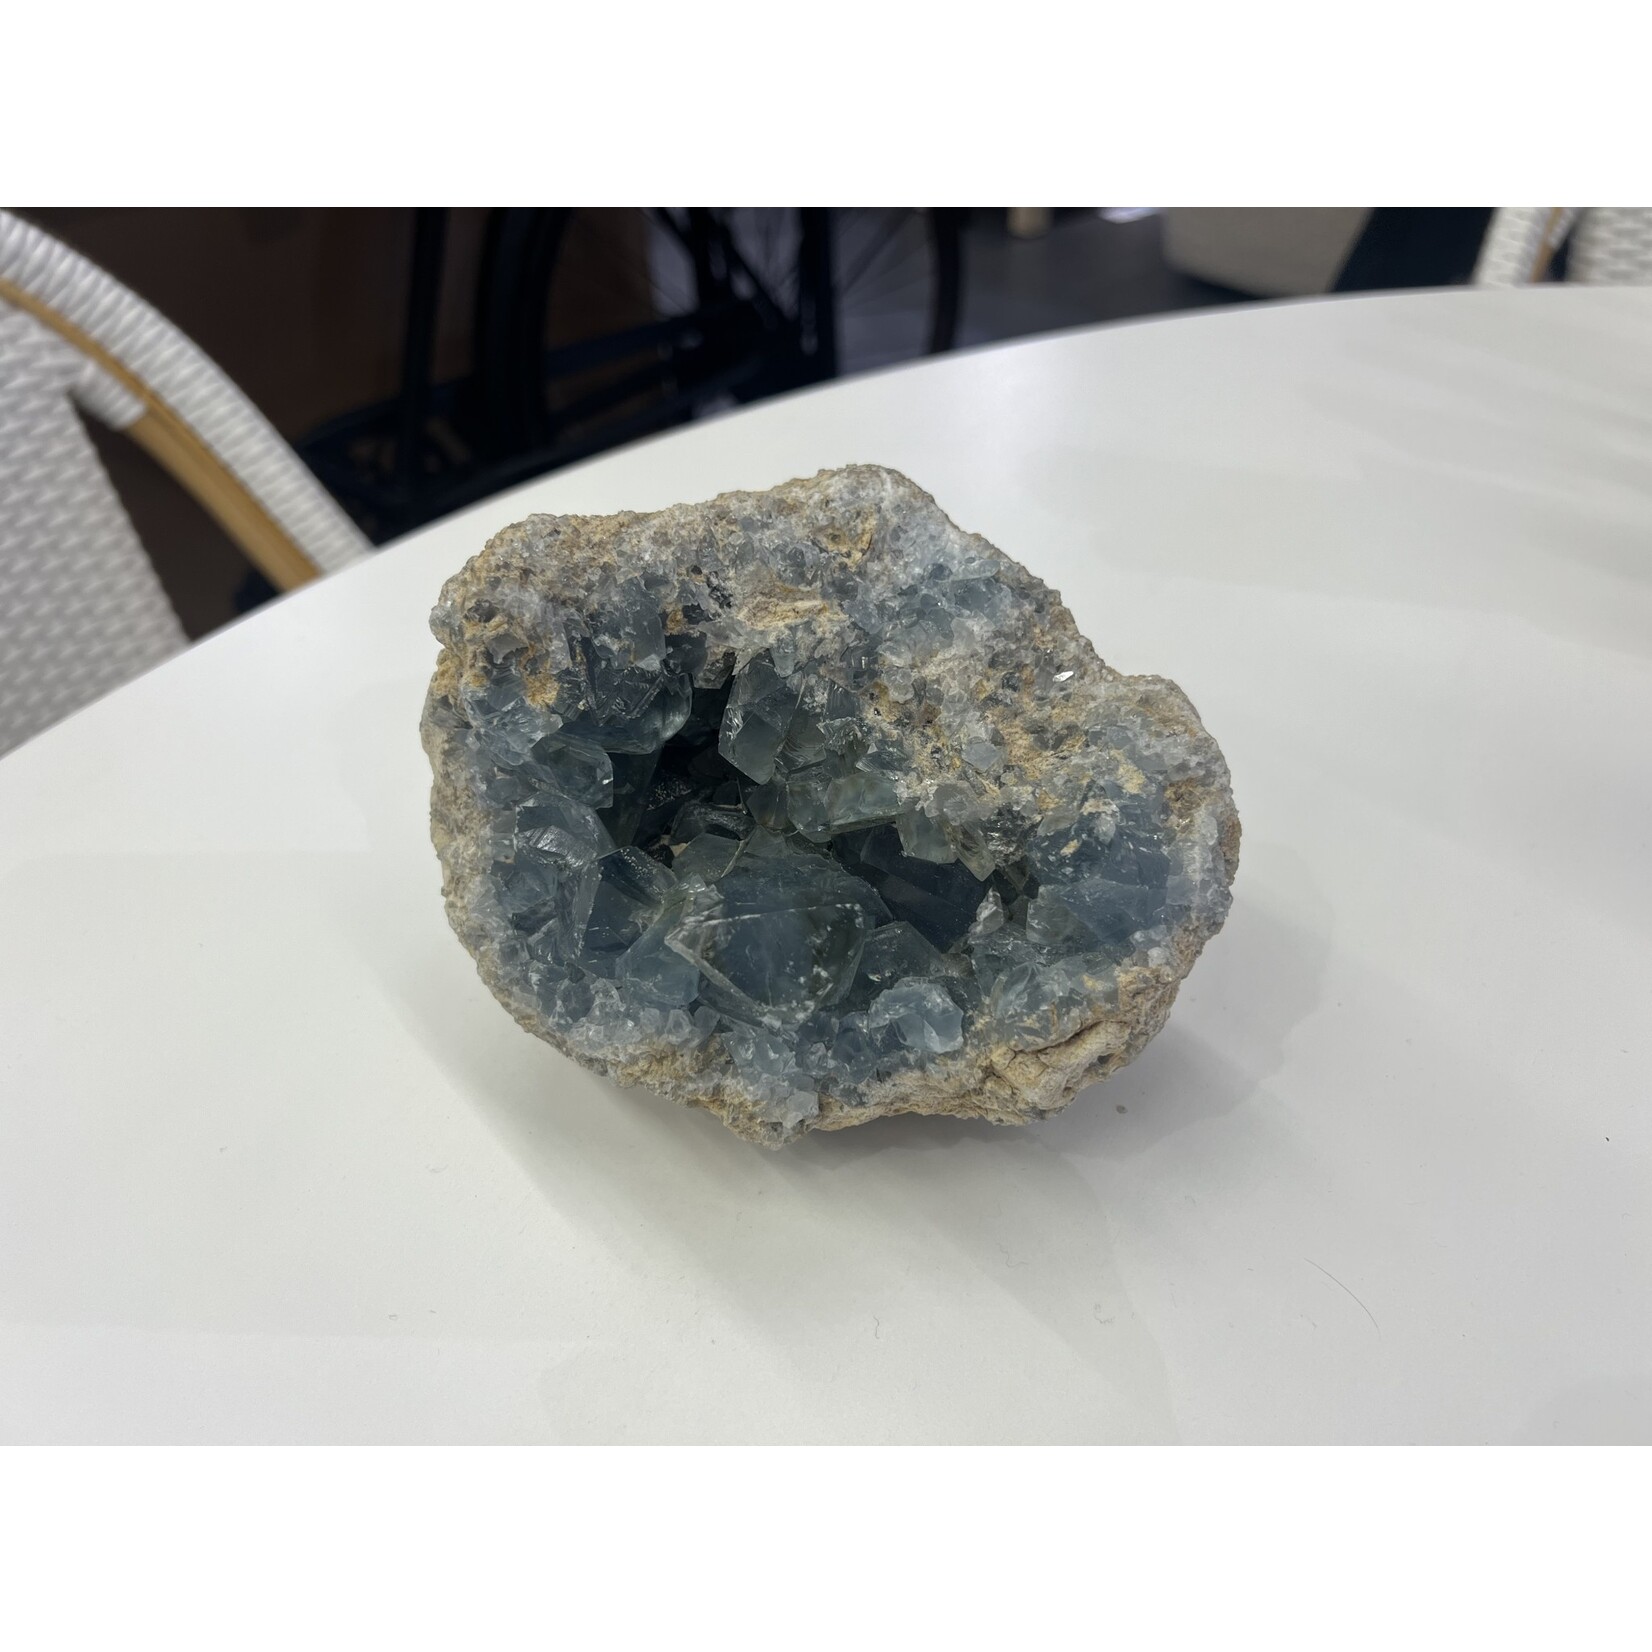 Outside The Box 6" x 6" x 5" Raw Celestite Geode Standing Cluster